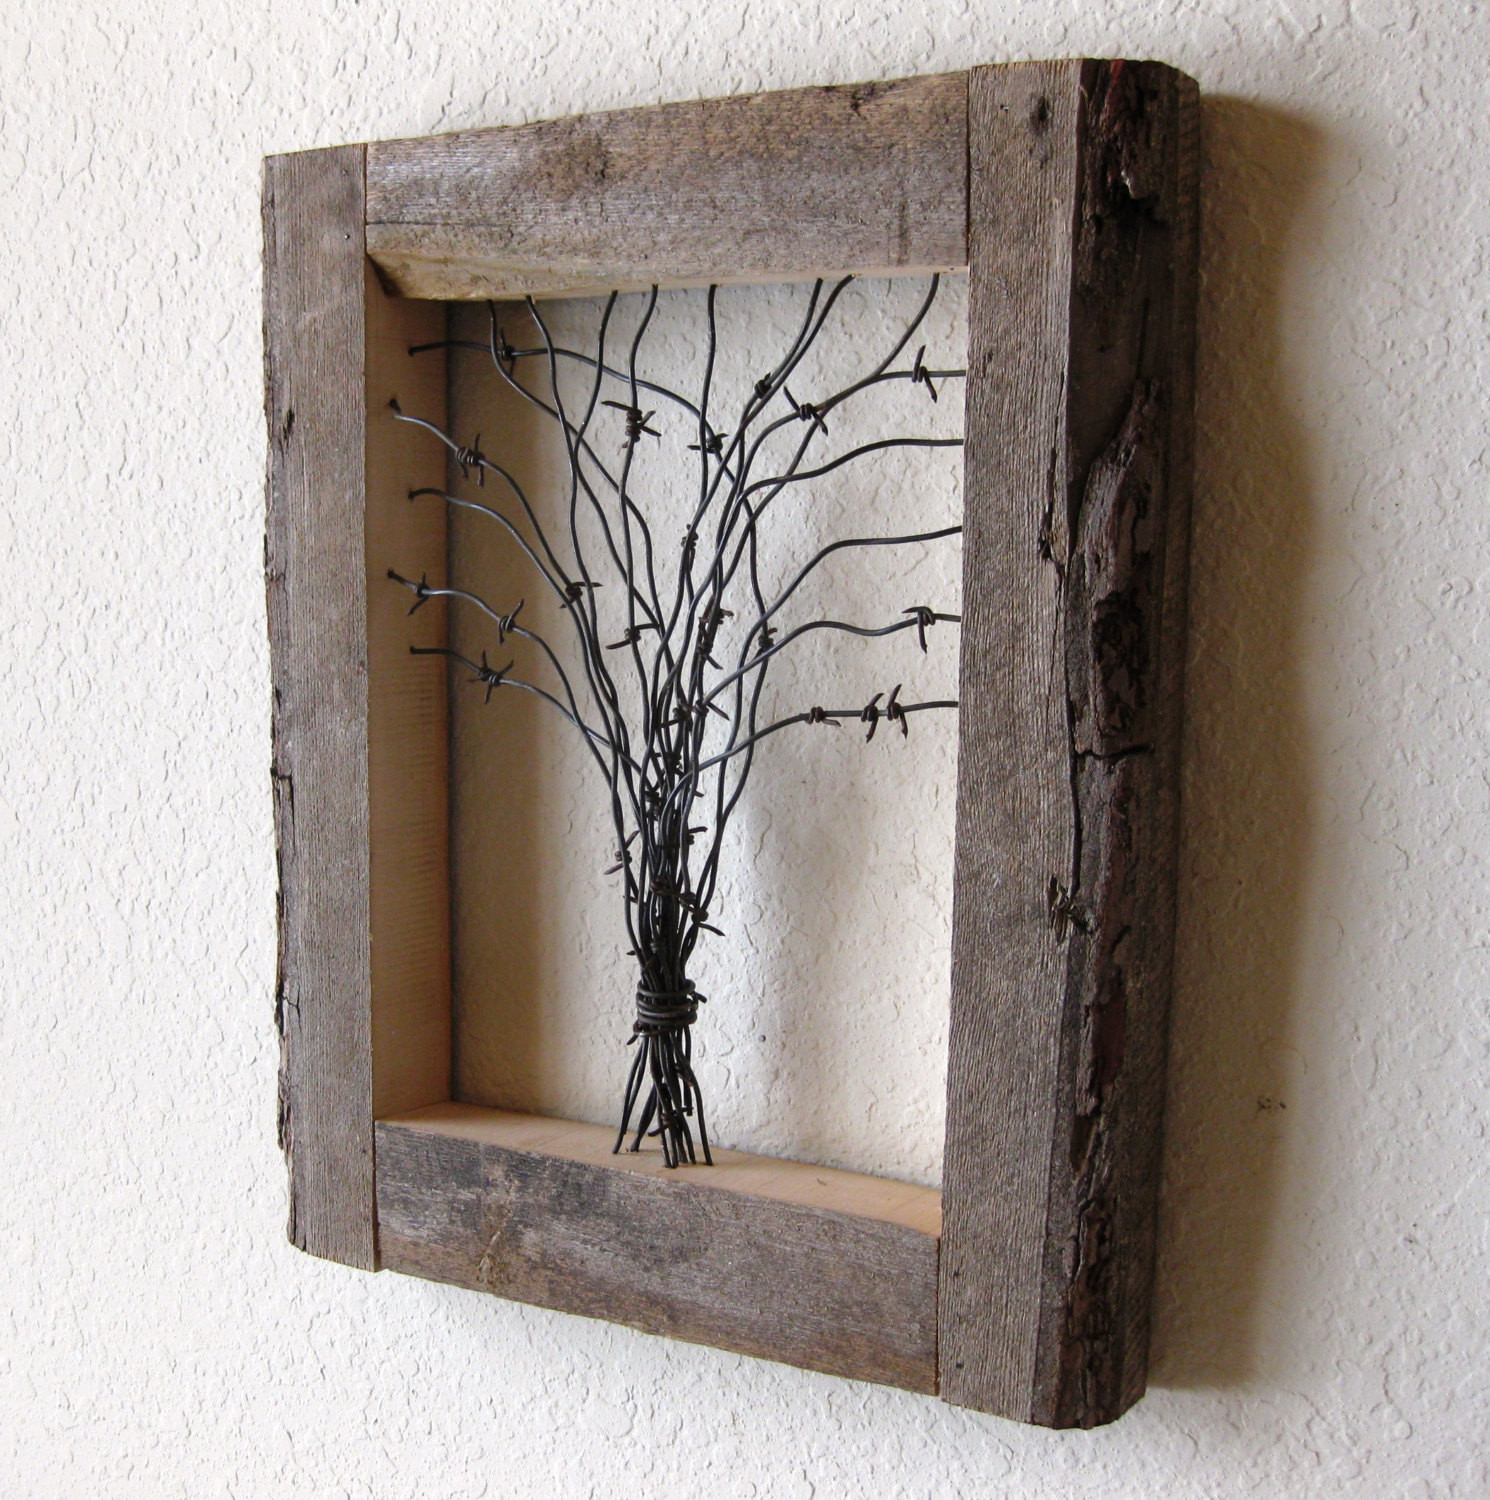 Barnwood Craft Ideas
 Reclaimed Barn Wood and Barbed Wire Tree Wall Art